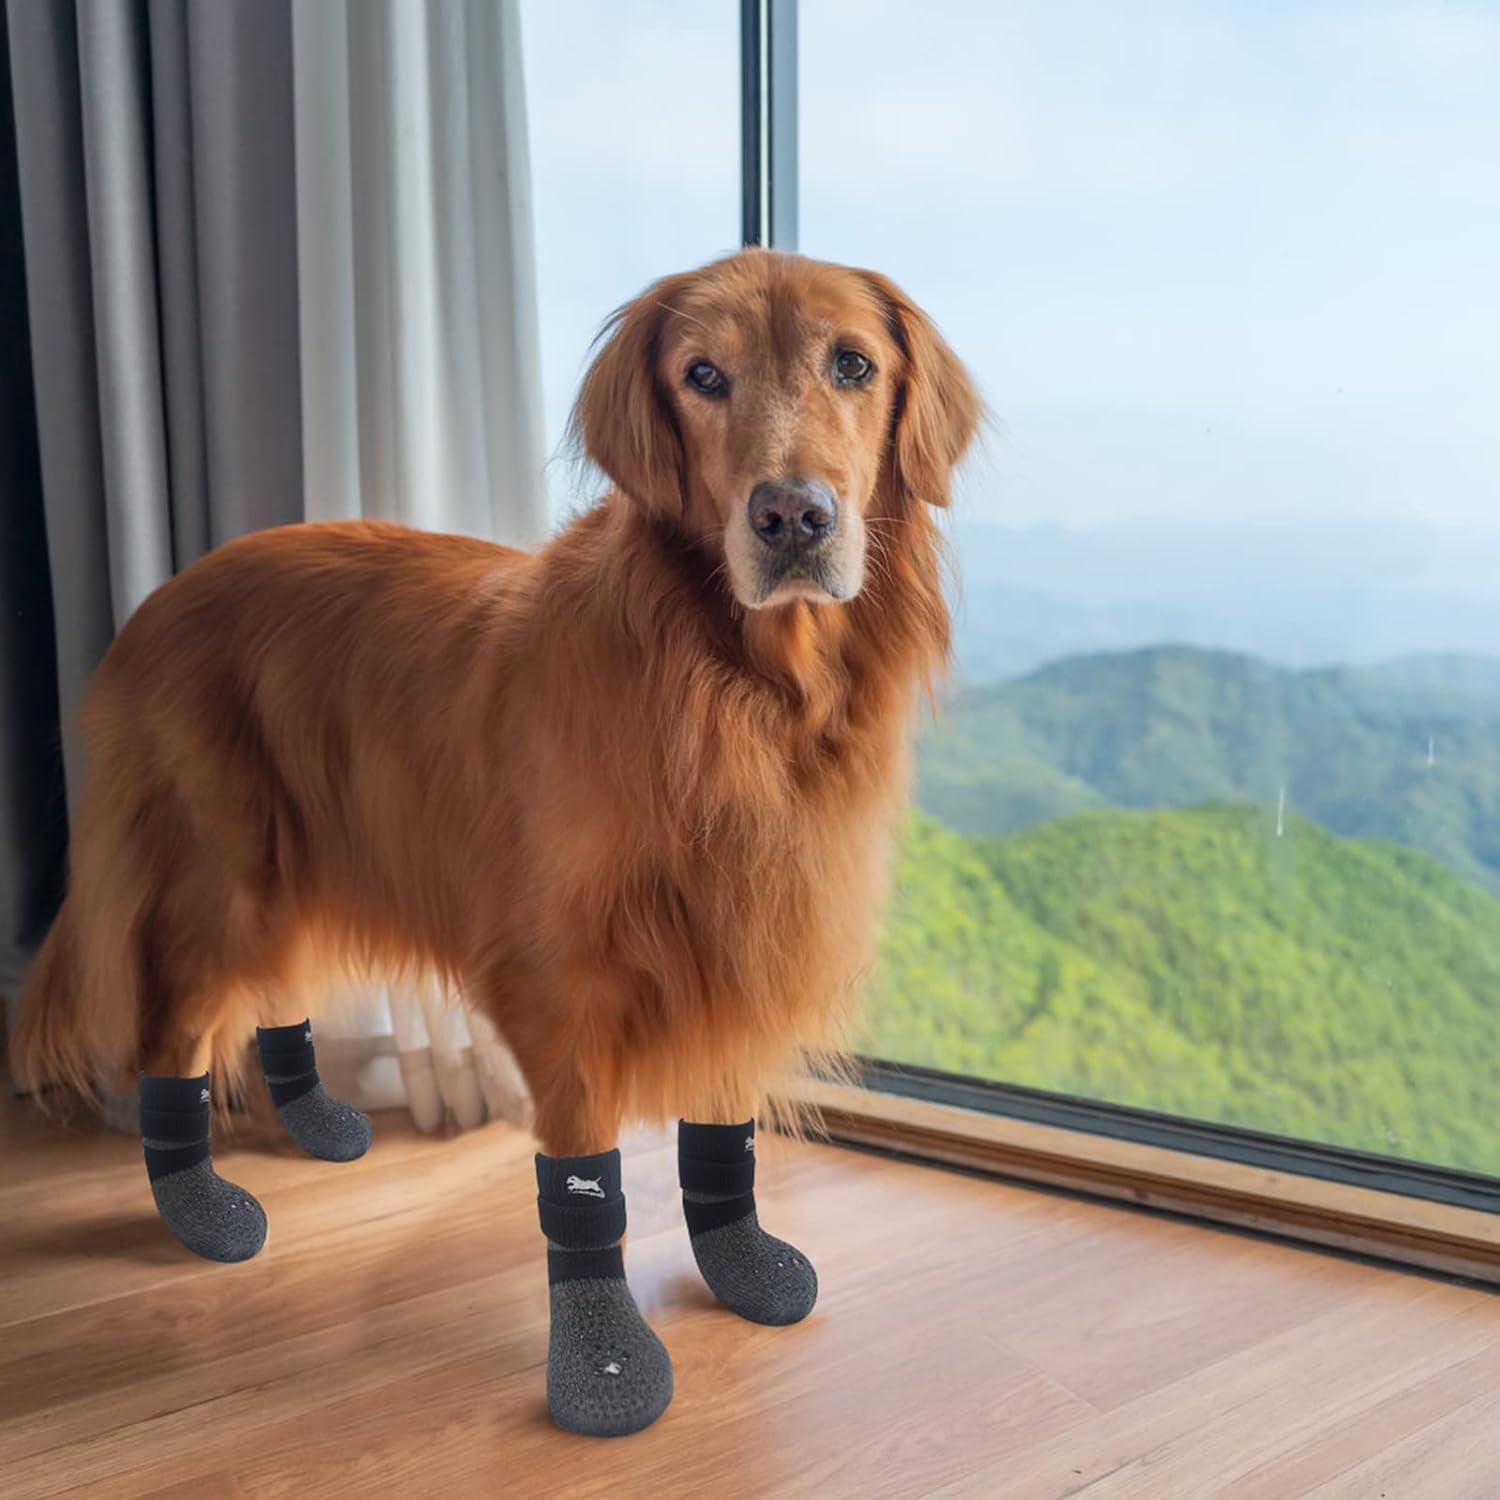 Anti Slip Dog Socks - Dog Grip Socks with Straps Traction Control for  Indoor on Hardwood Floor Wear, Pet Paw Protector 